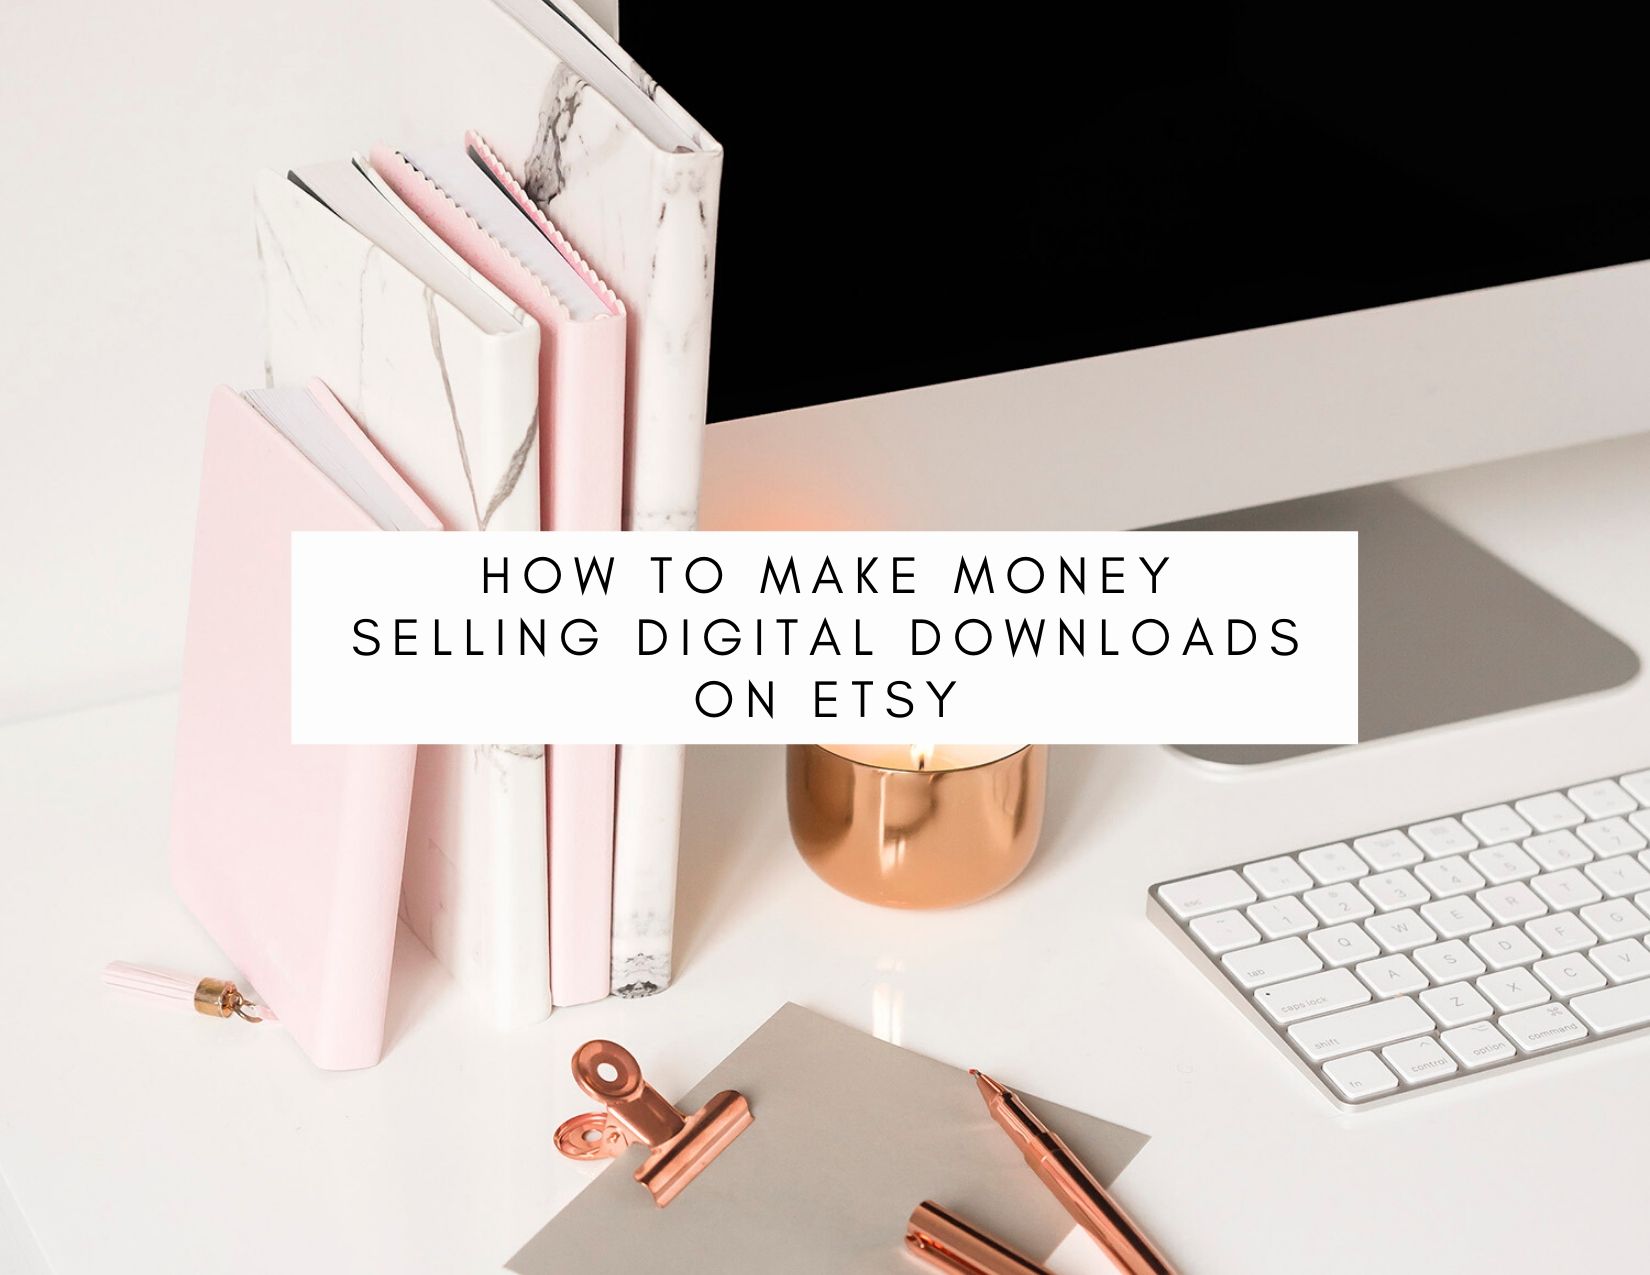 How To Make Money Selling Digital Downloads On Etsy